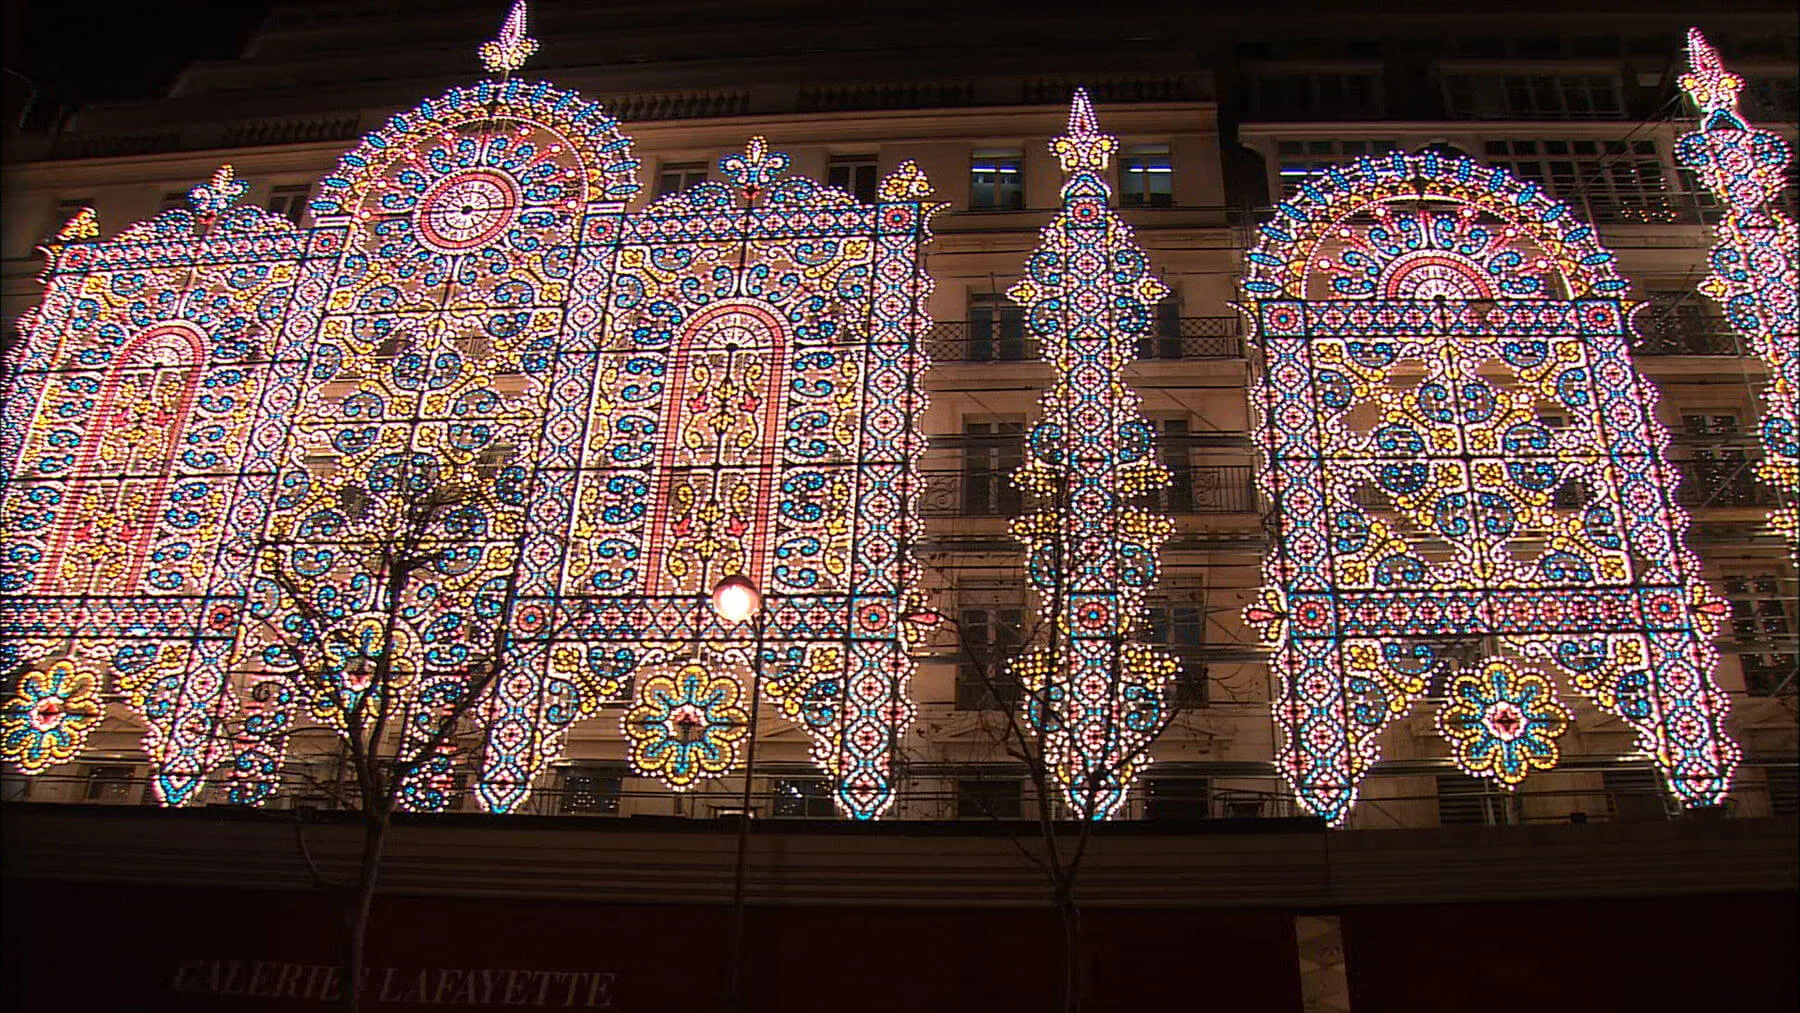 The facade of Galeries Lafayette — a major department store — is decorated with thousands of lights at Christmastime